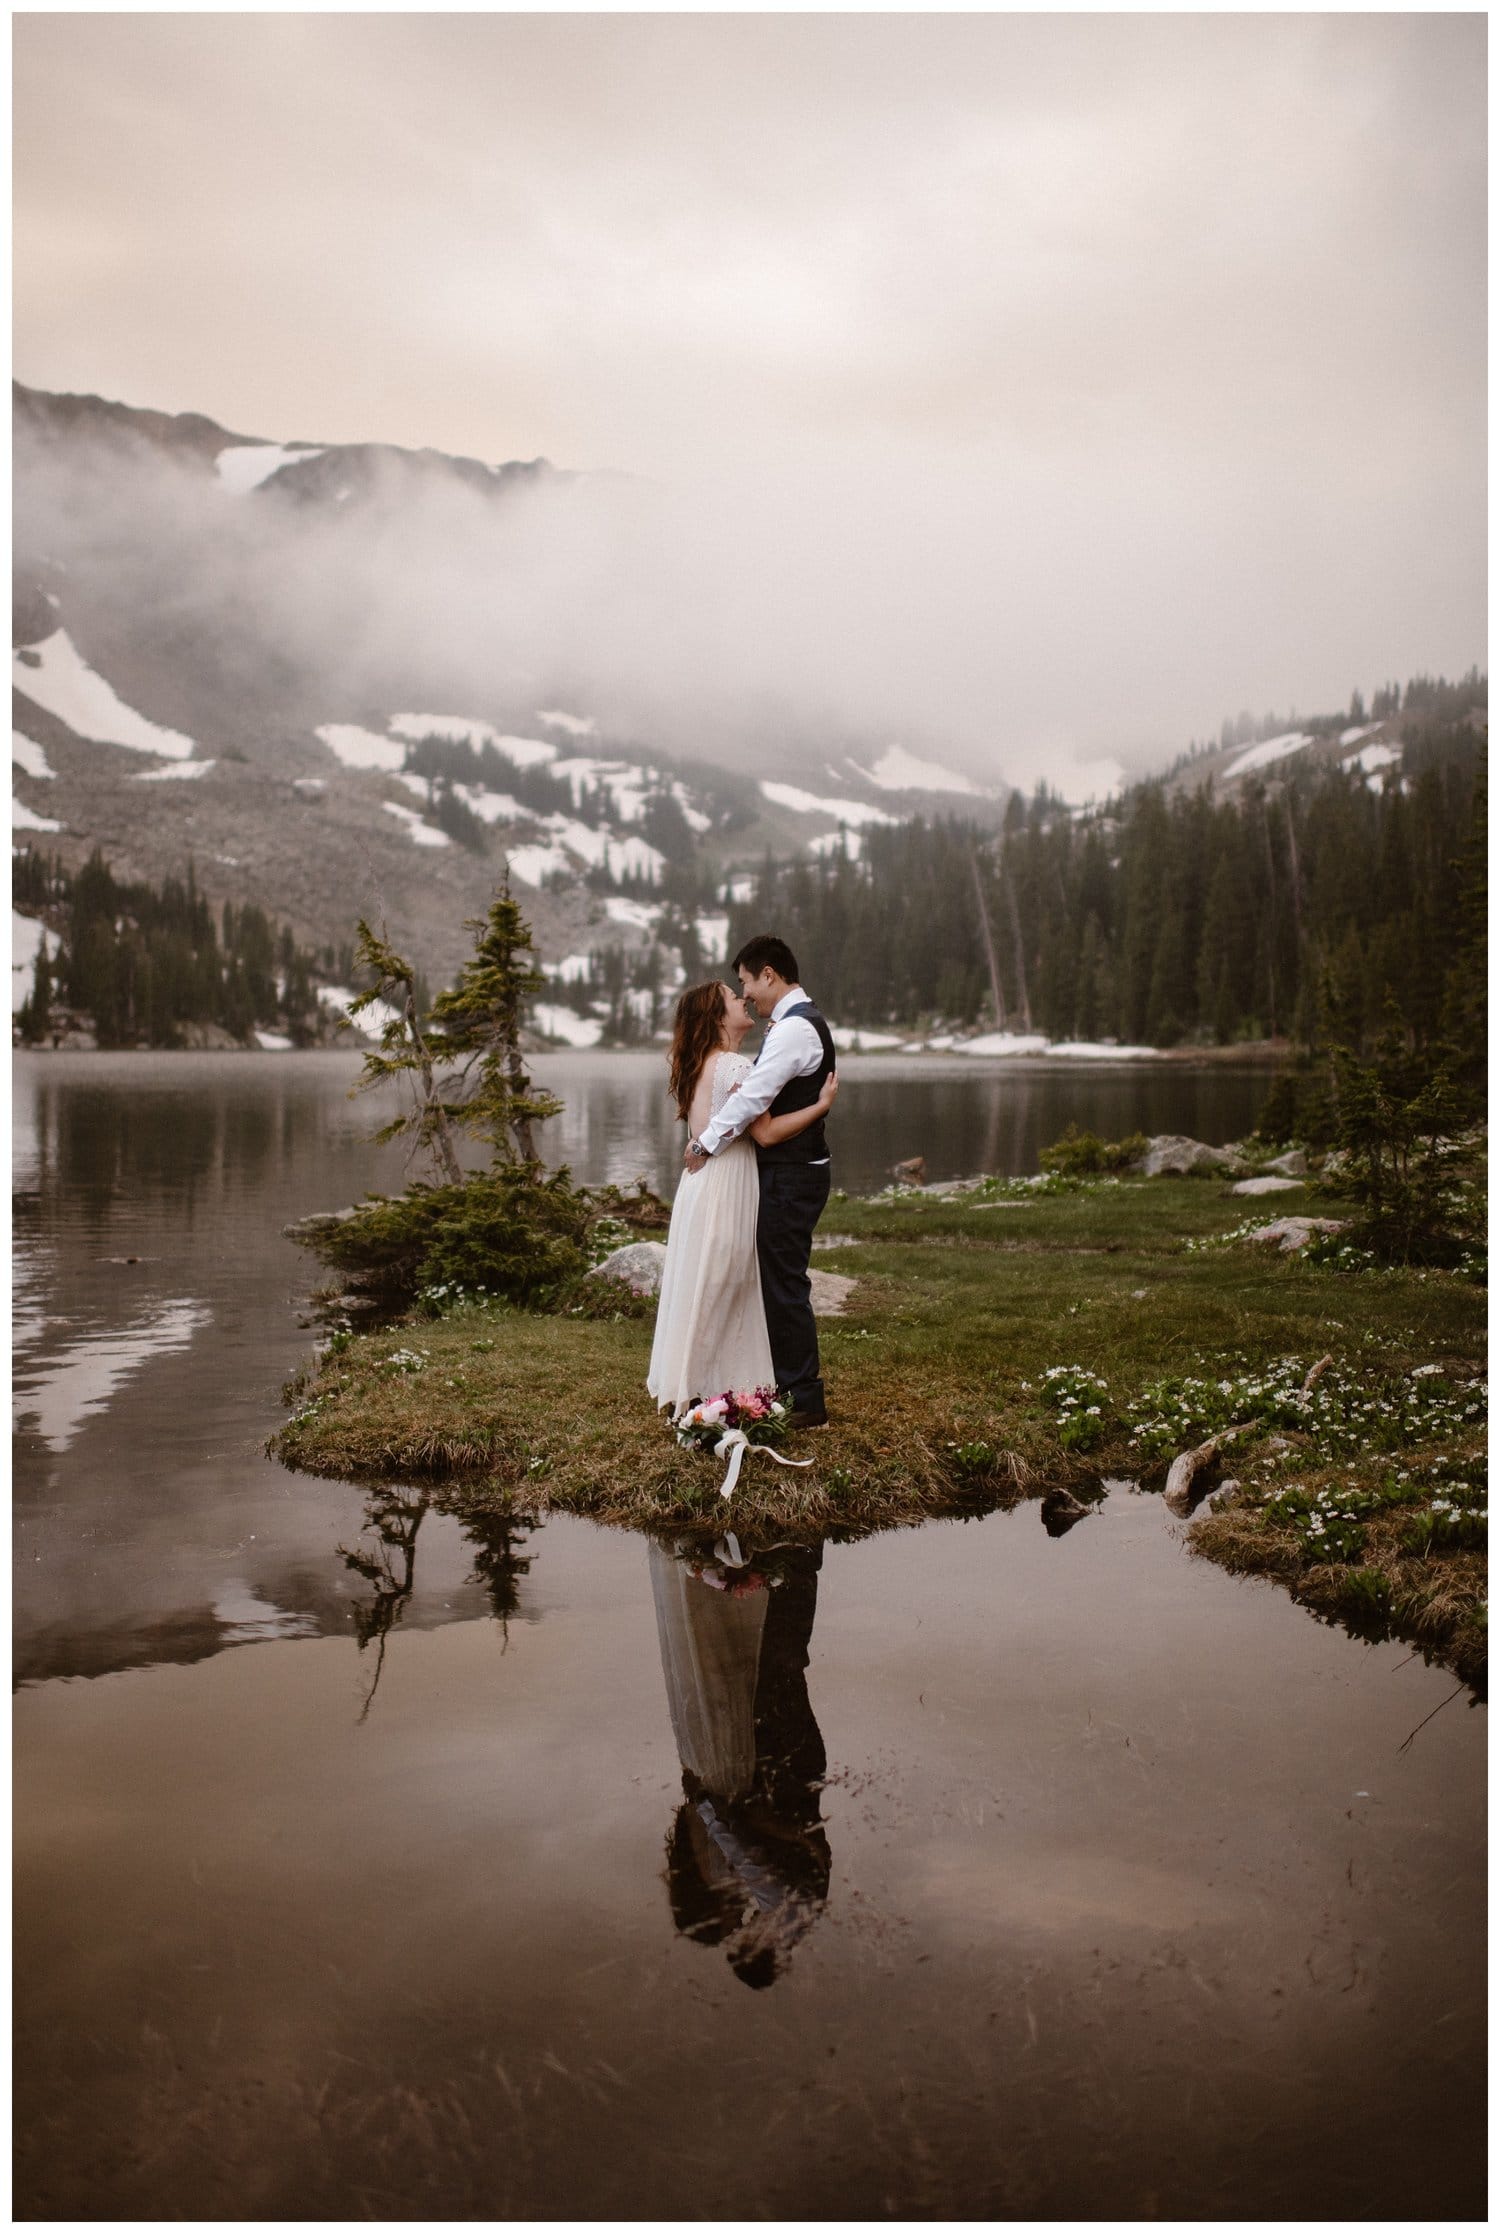 Bride and groom embrace while smiling at each other and standing in front of a high alpine lake, near Boulder, Colorado. There are trees and snow-capped mountains in the background.